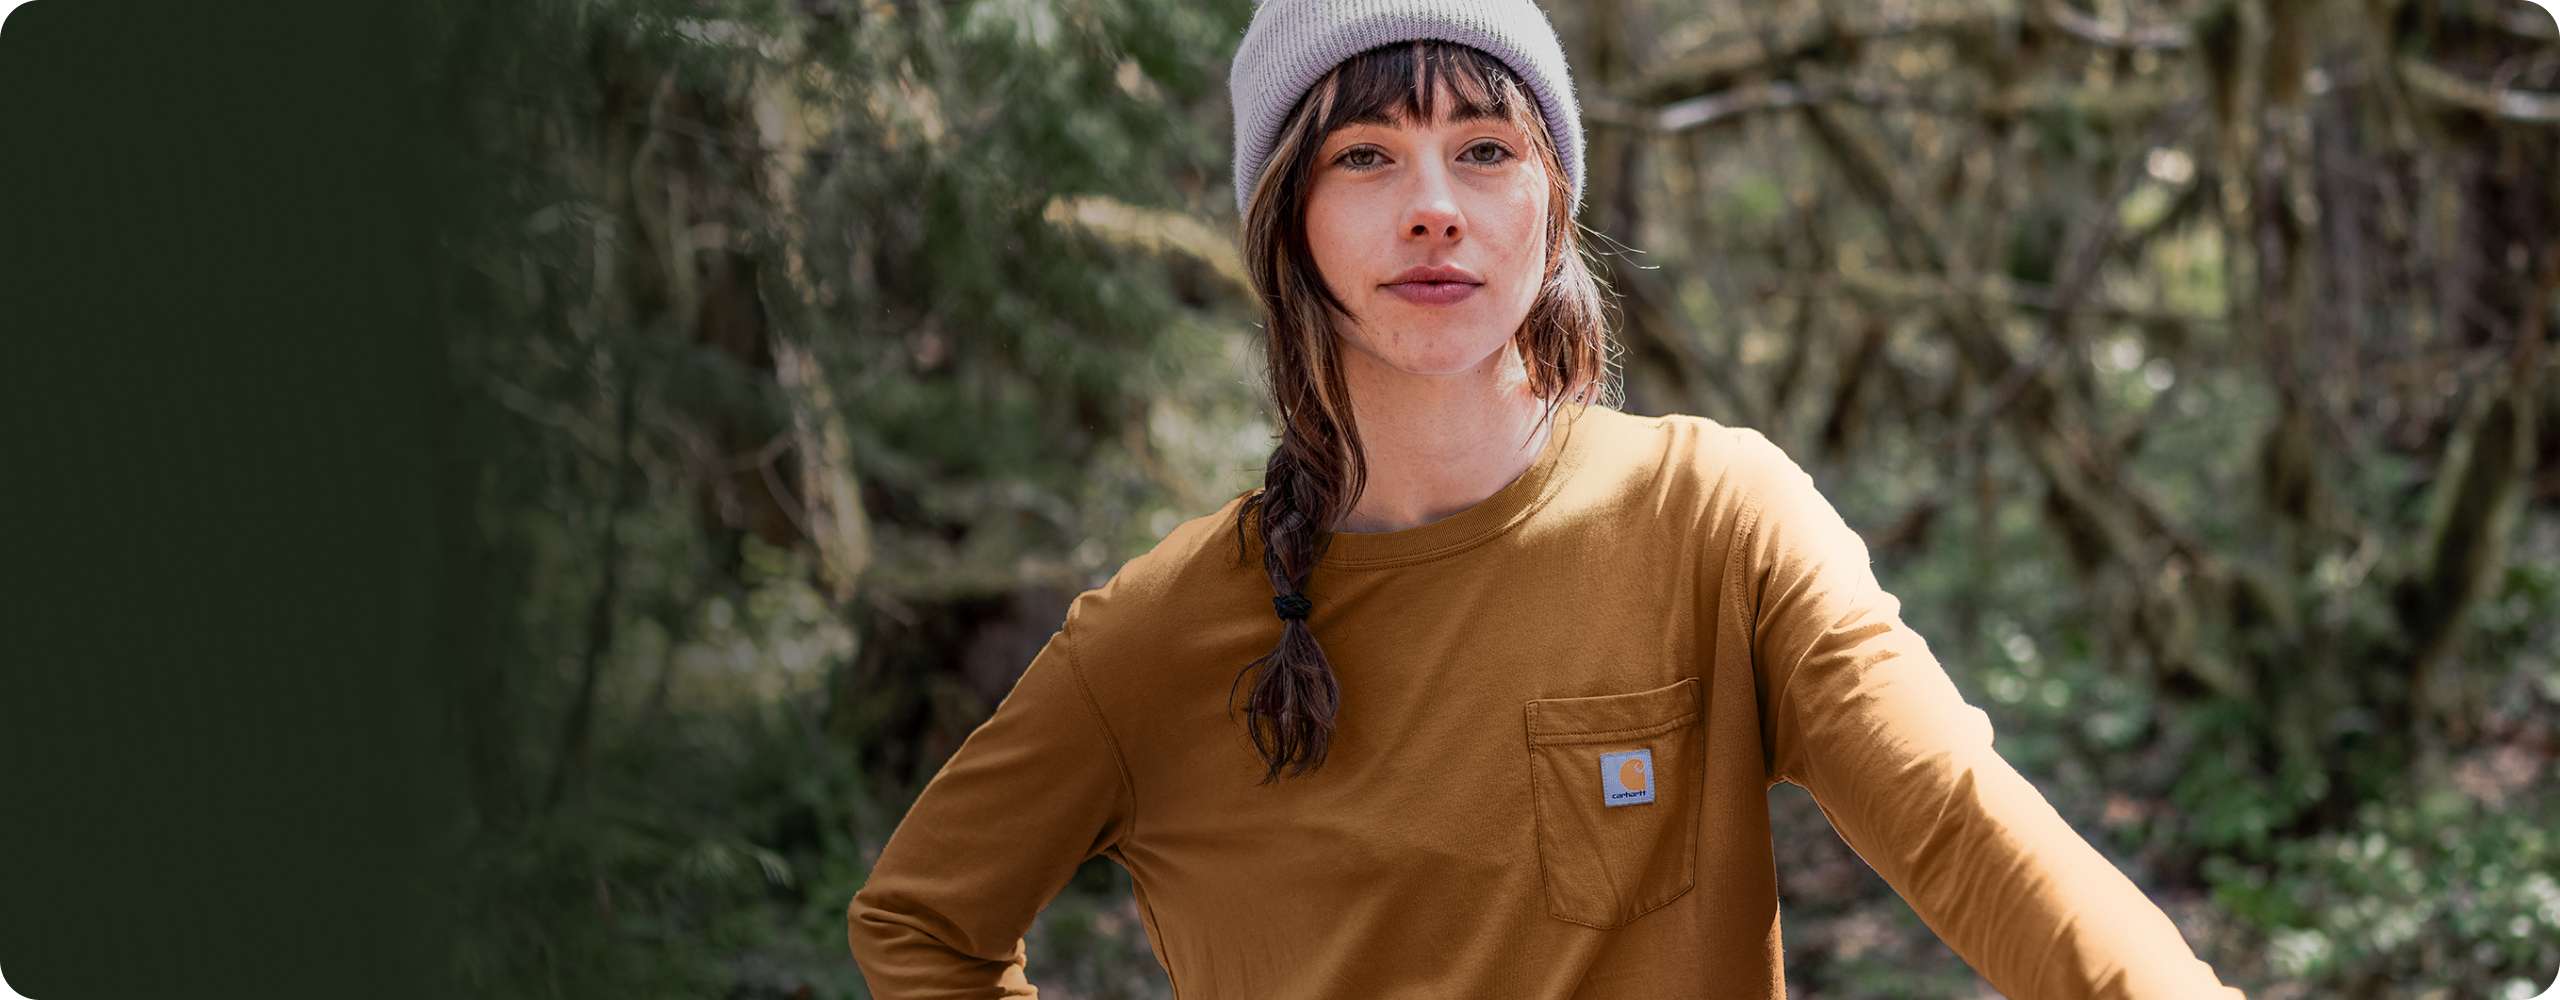 The Prospector - 🌼LADIES THEY'RE HERE!!🌼 Carhartt's new Women's